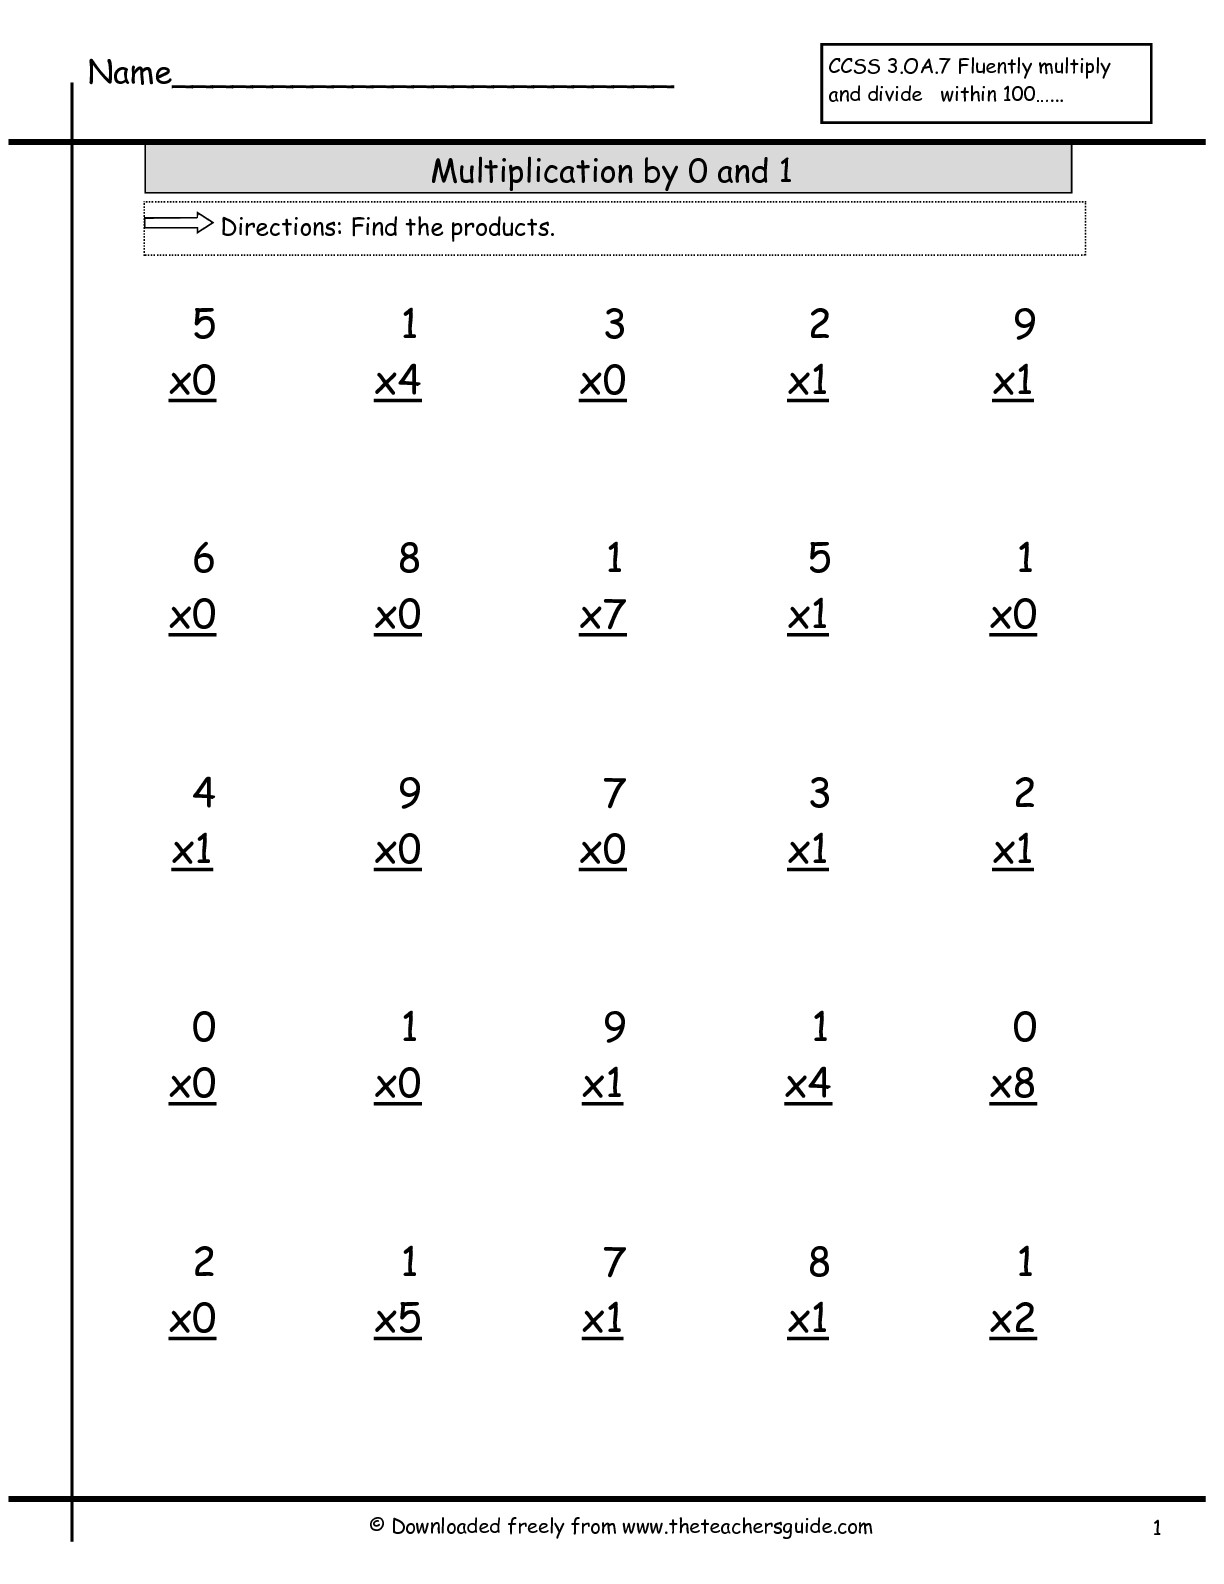 Multiplication Facts Worksheets From The Teacher&amp;#039;s Guide in Printable Multiplication Worksheets 0-5